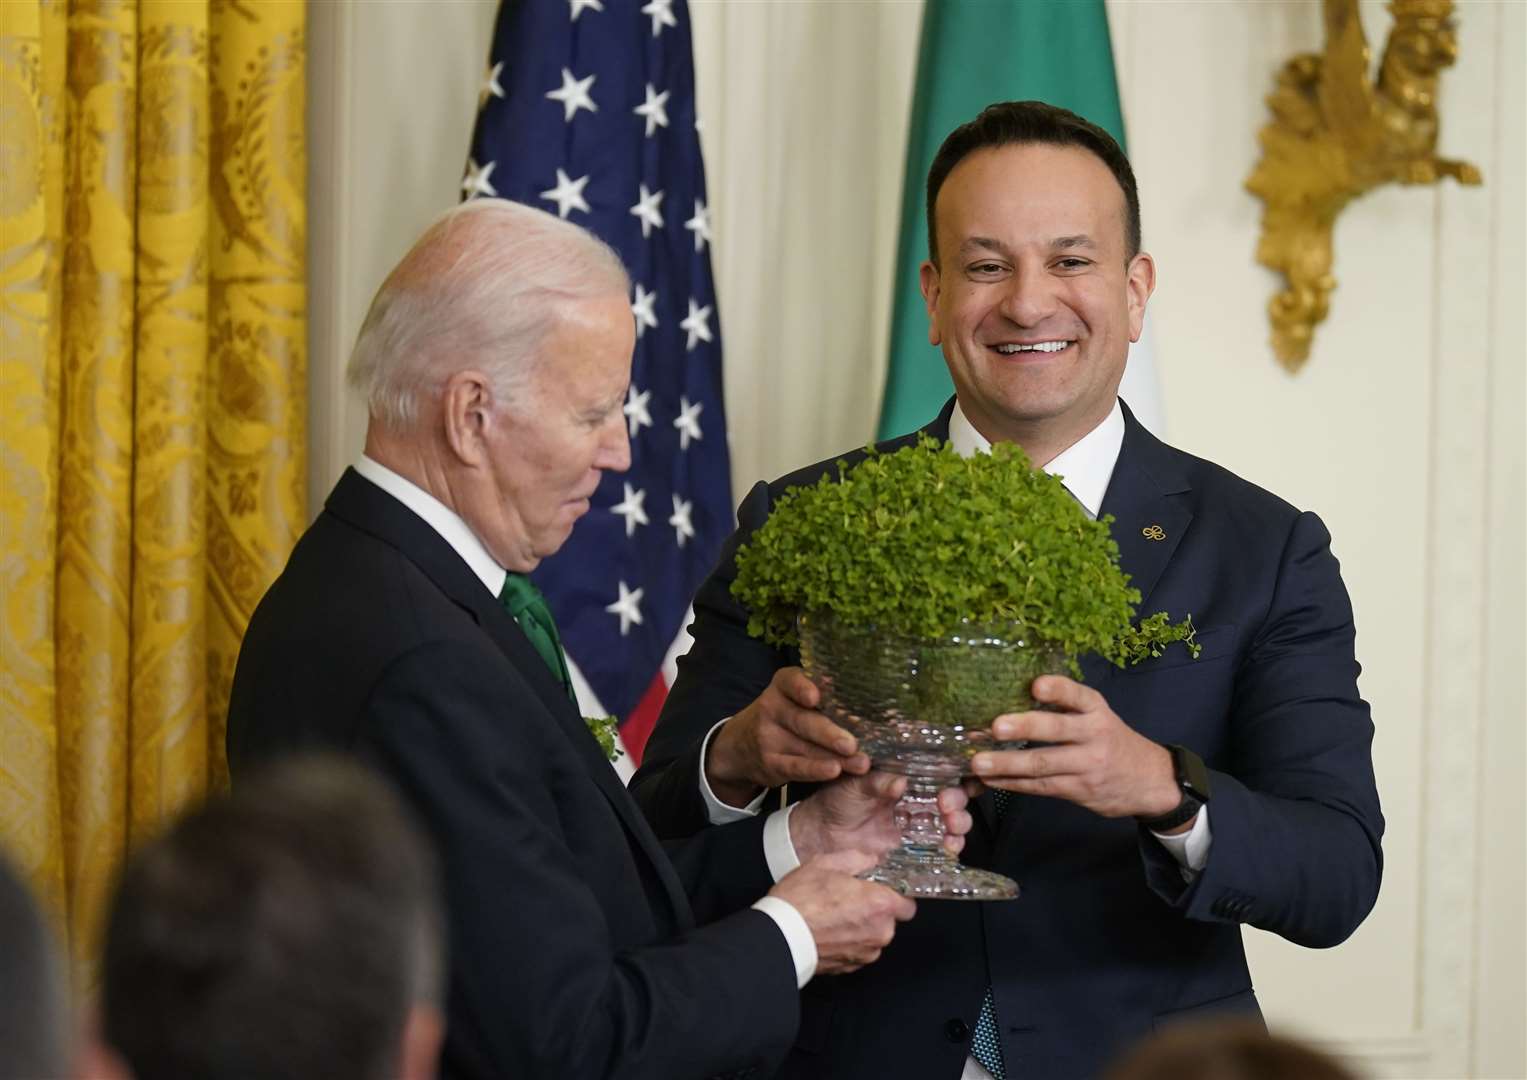 Taoiseach Leo Varadkar presents Mr Biden with a bowl of shamrock during a St Patrick’s Day celebration at the White House in Washington (Niall Carson/PA)